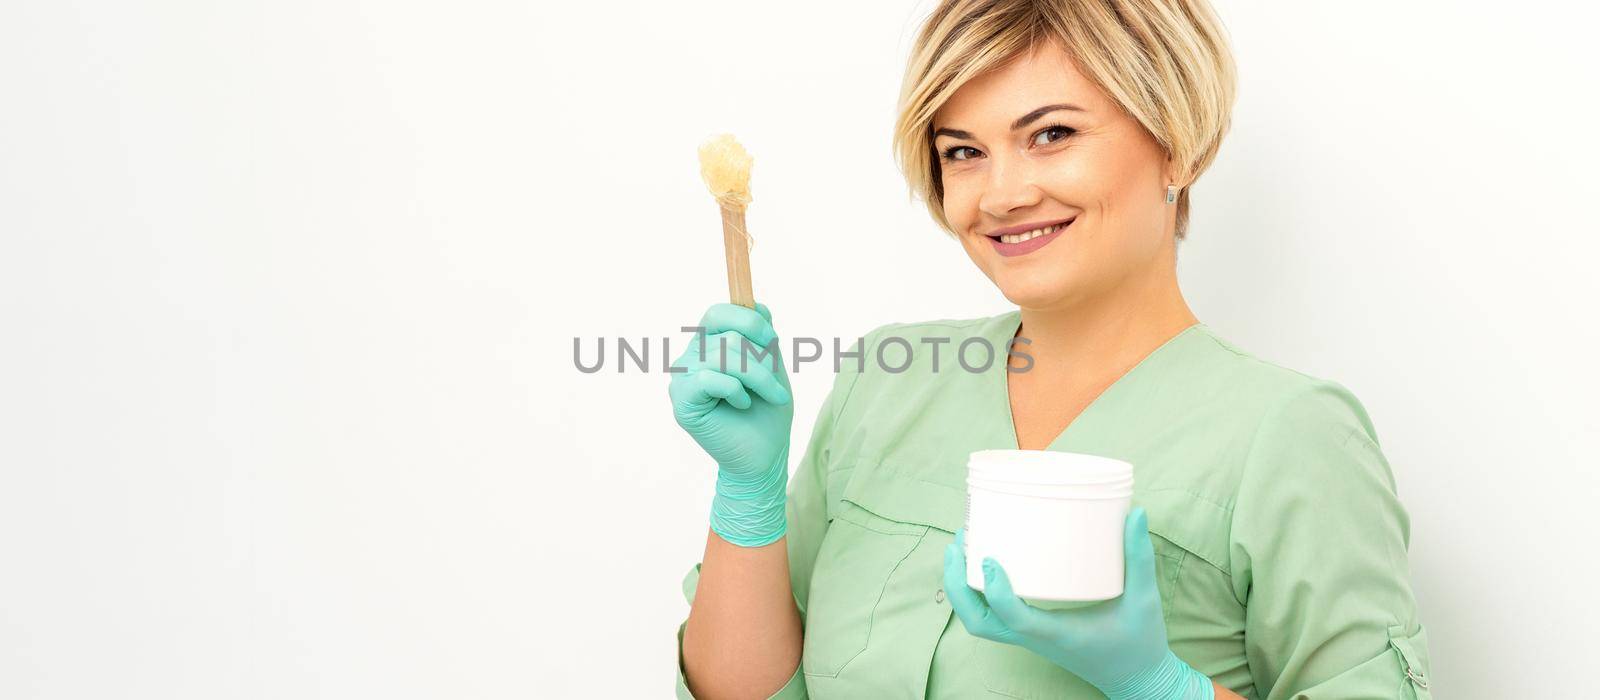 The master of sugar hair removal holds liquid yellow sugar paste, wax for depilation with the jar on a wooden stick on a white background